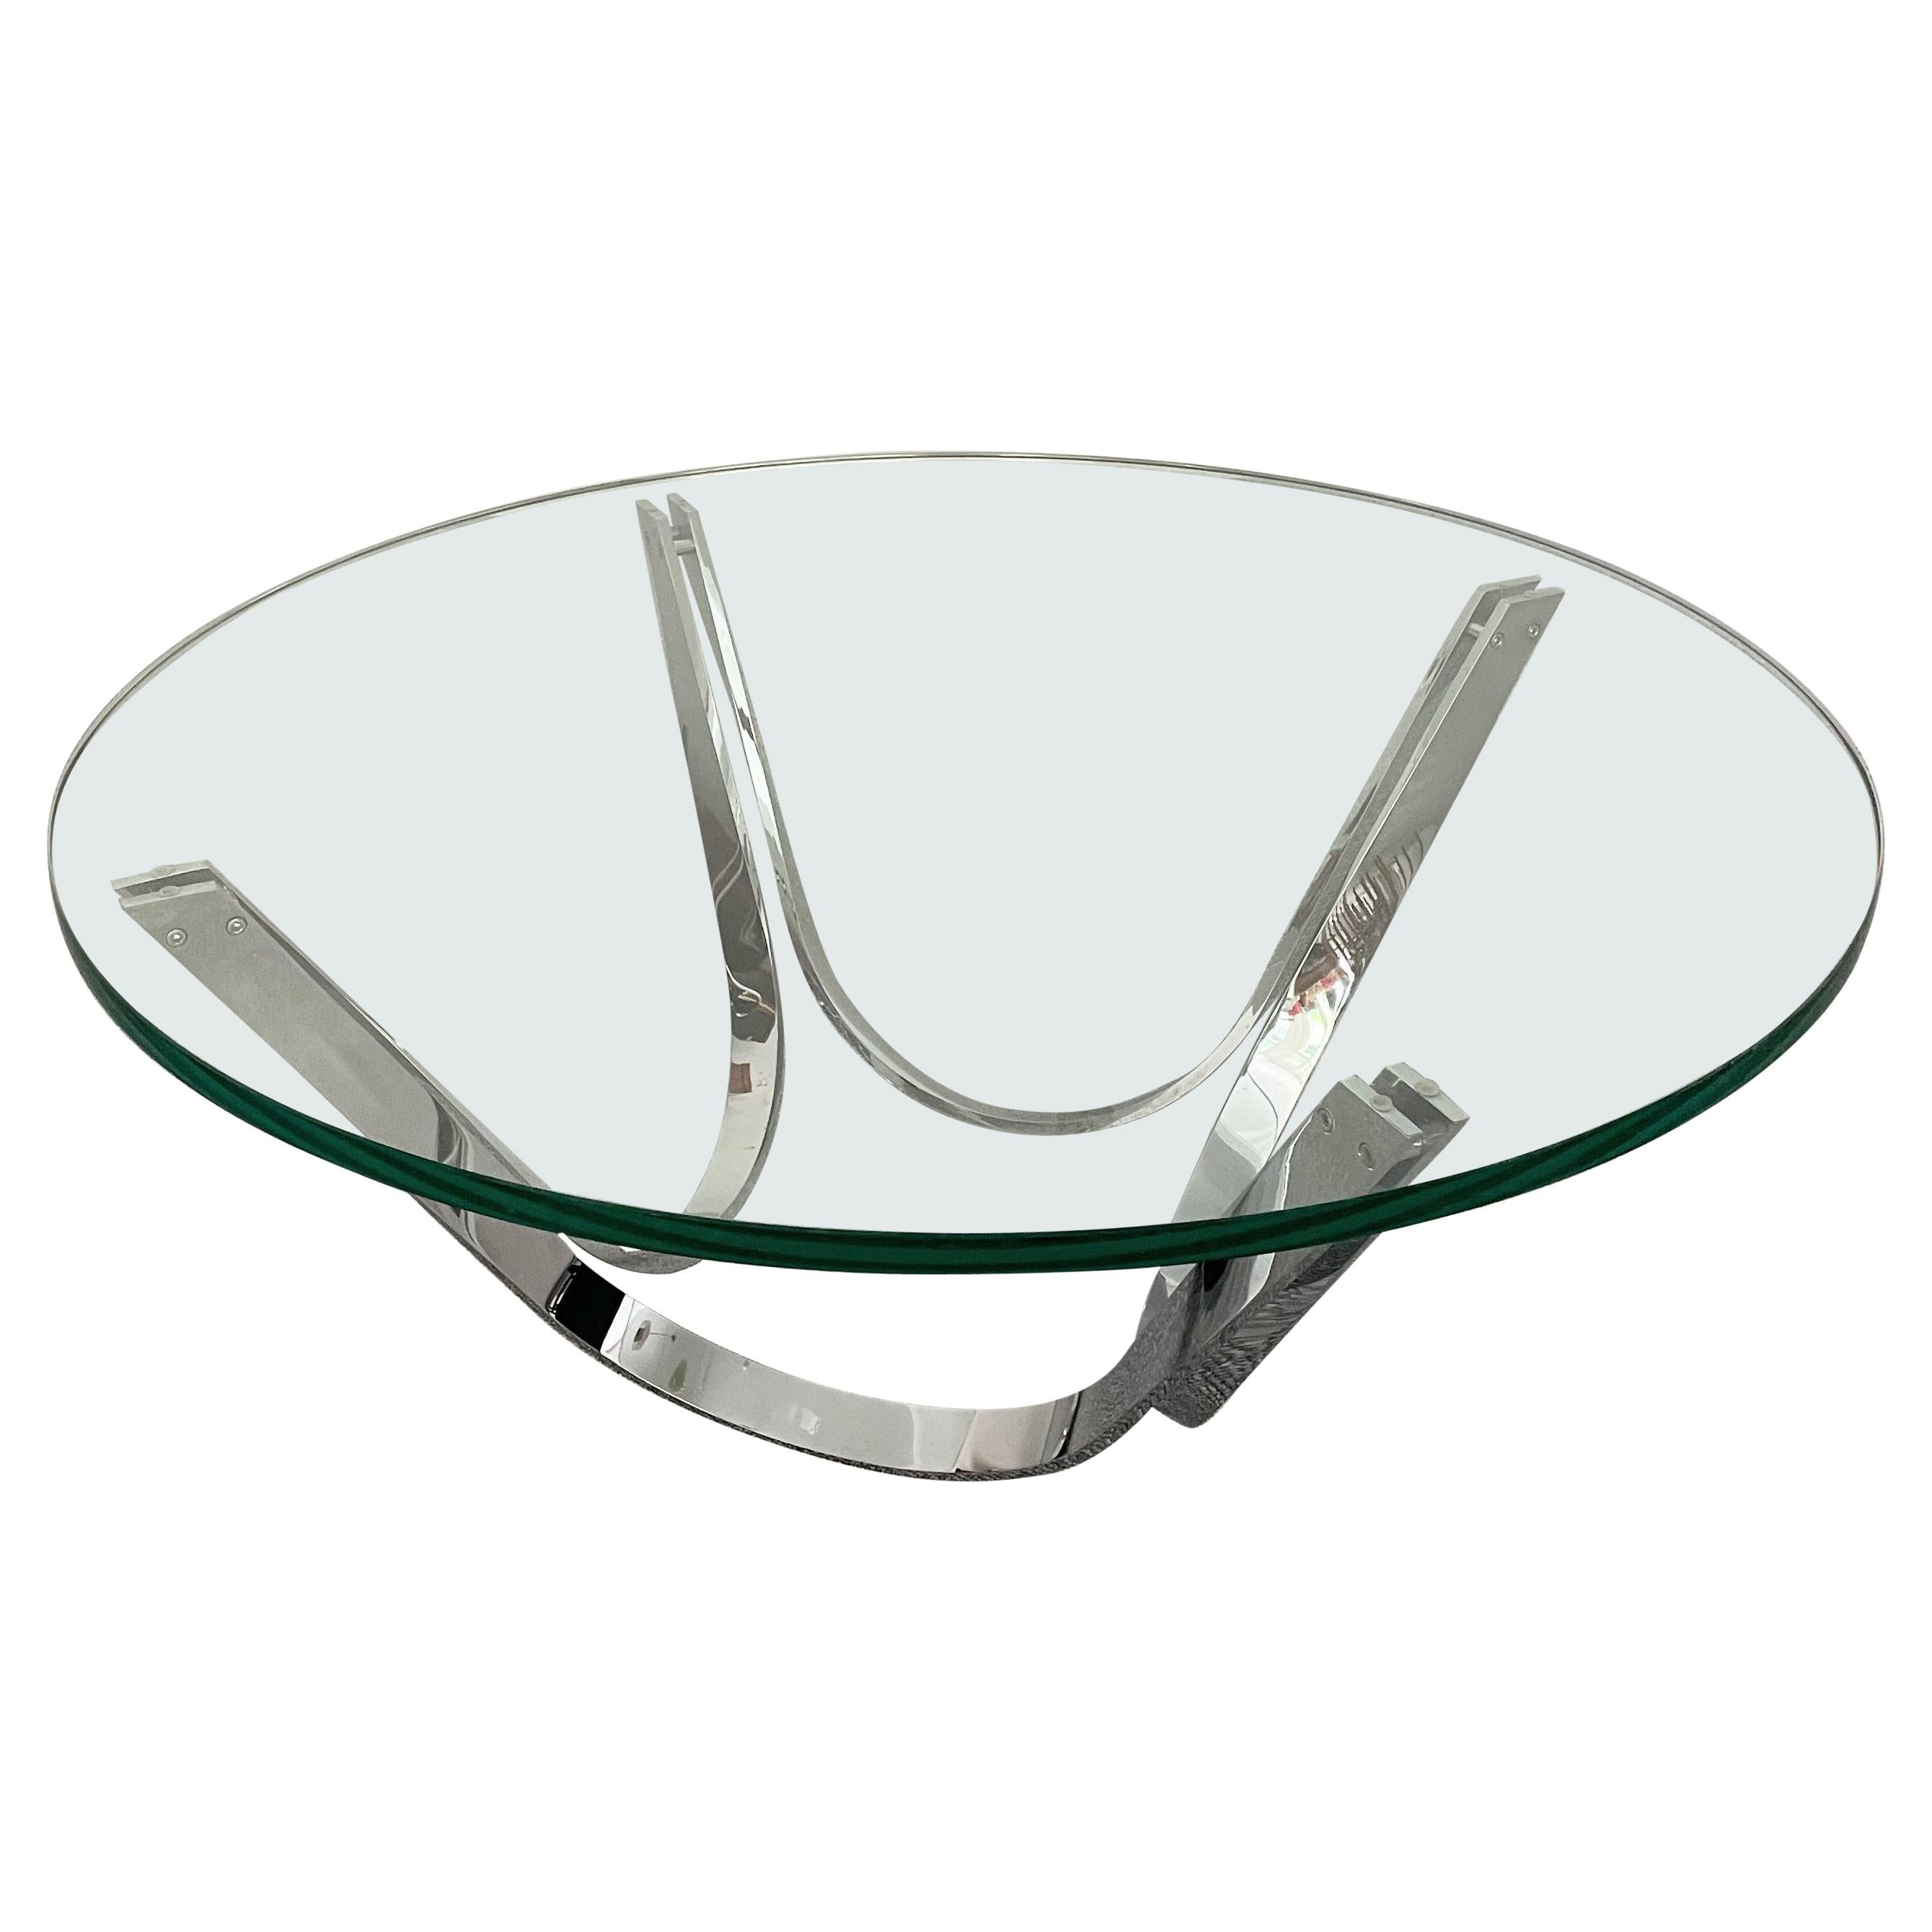 Modern Glass Cocktail Table by Roger Sprunger for Dunbar 1970